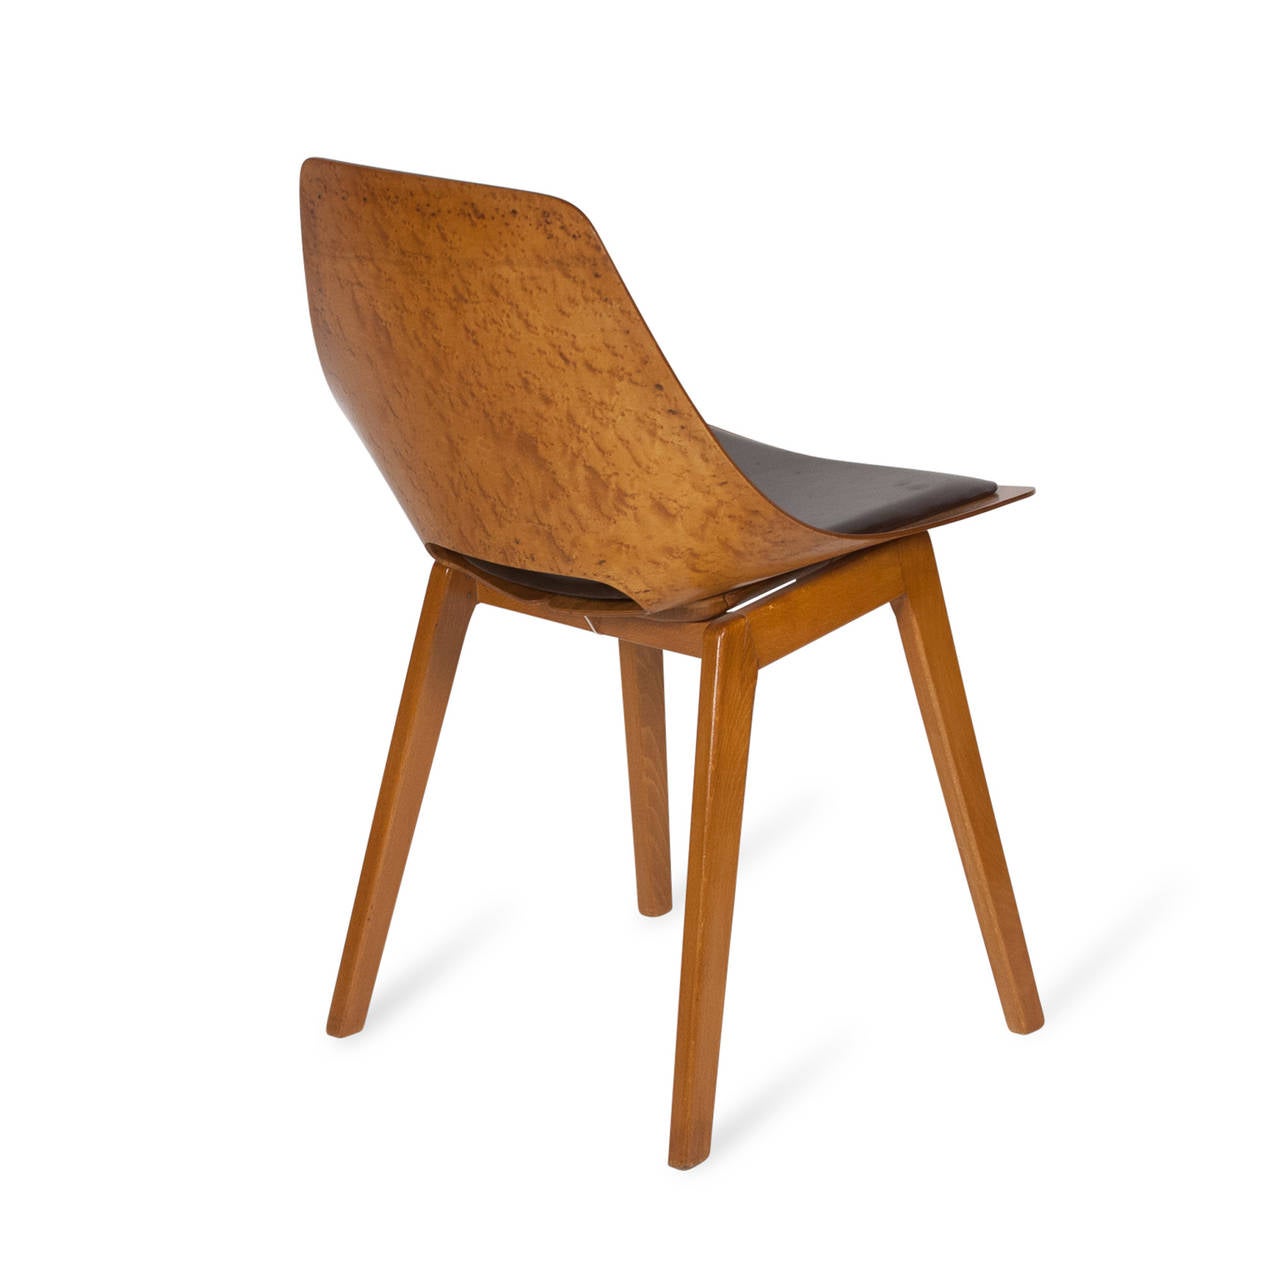 Original Molded Wood Chair by Pierre Guariche, French, 1950 1